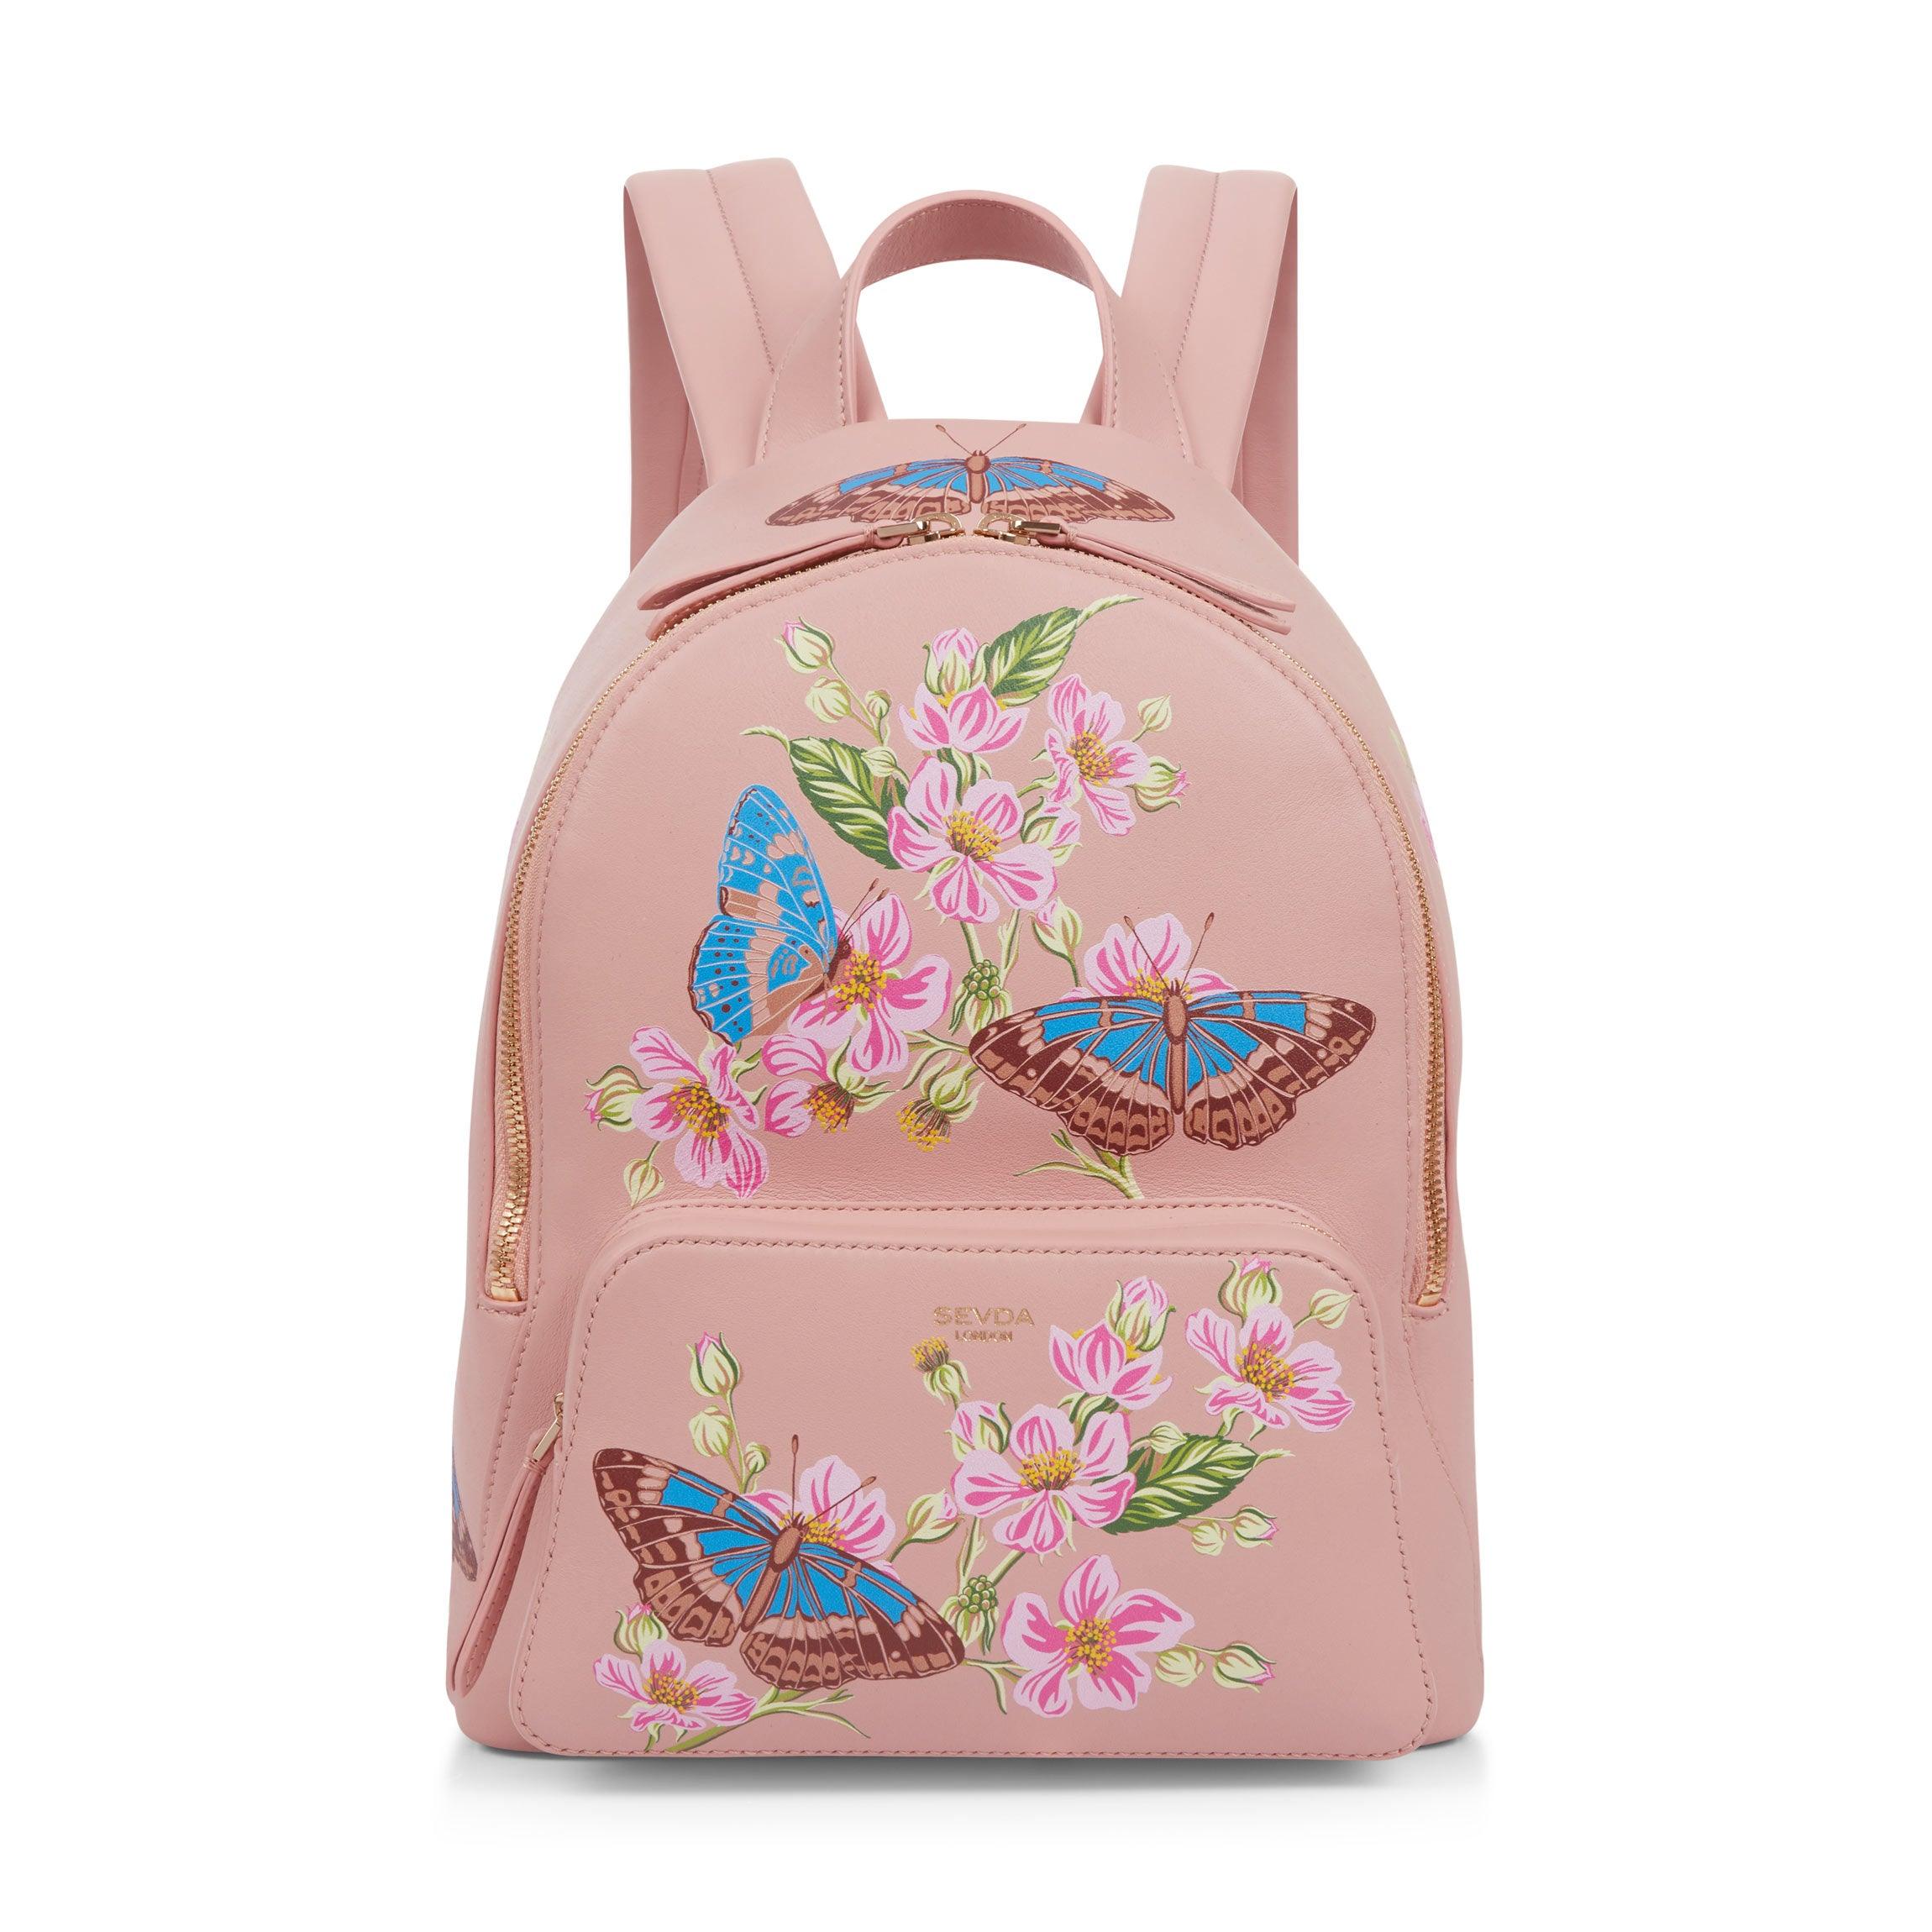 Pink Backpack with Flowers Print - The fusion of London's design and Italian craftsmanship.